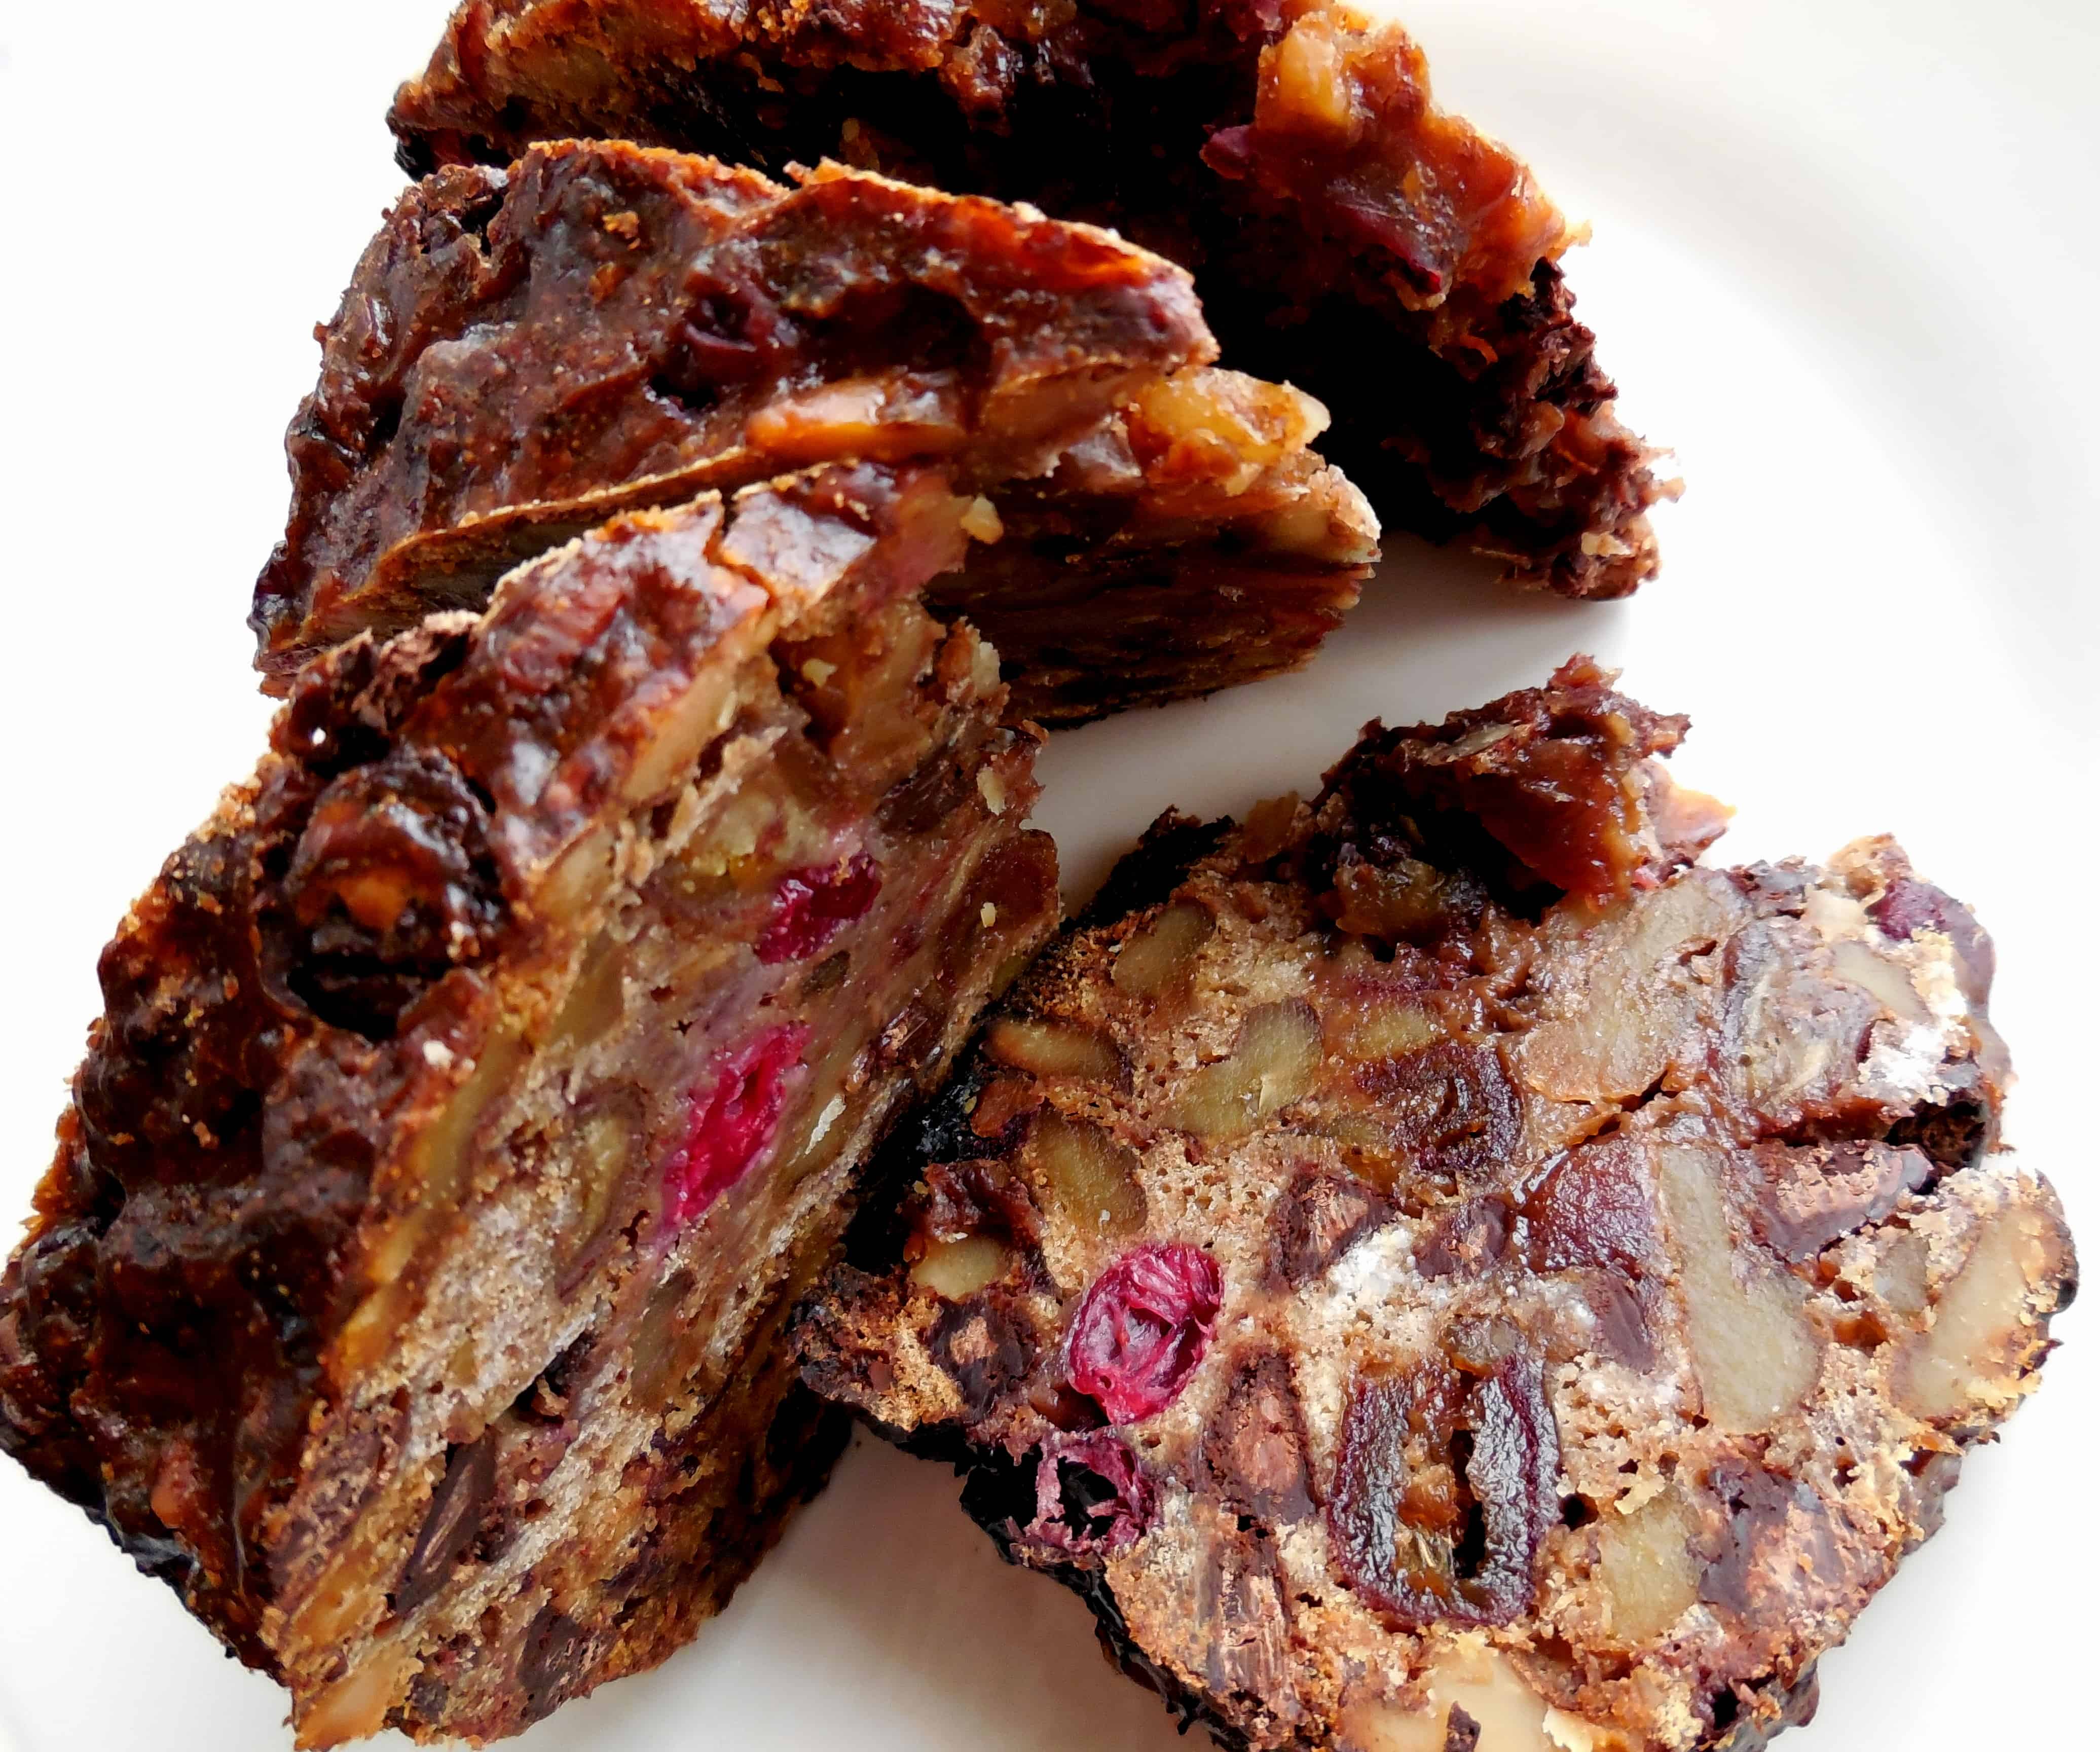 Festive Chocolate Cranberry Bishop's Bread. A dessert bread with cranberries, dates, chocolate, walnuts and rum.